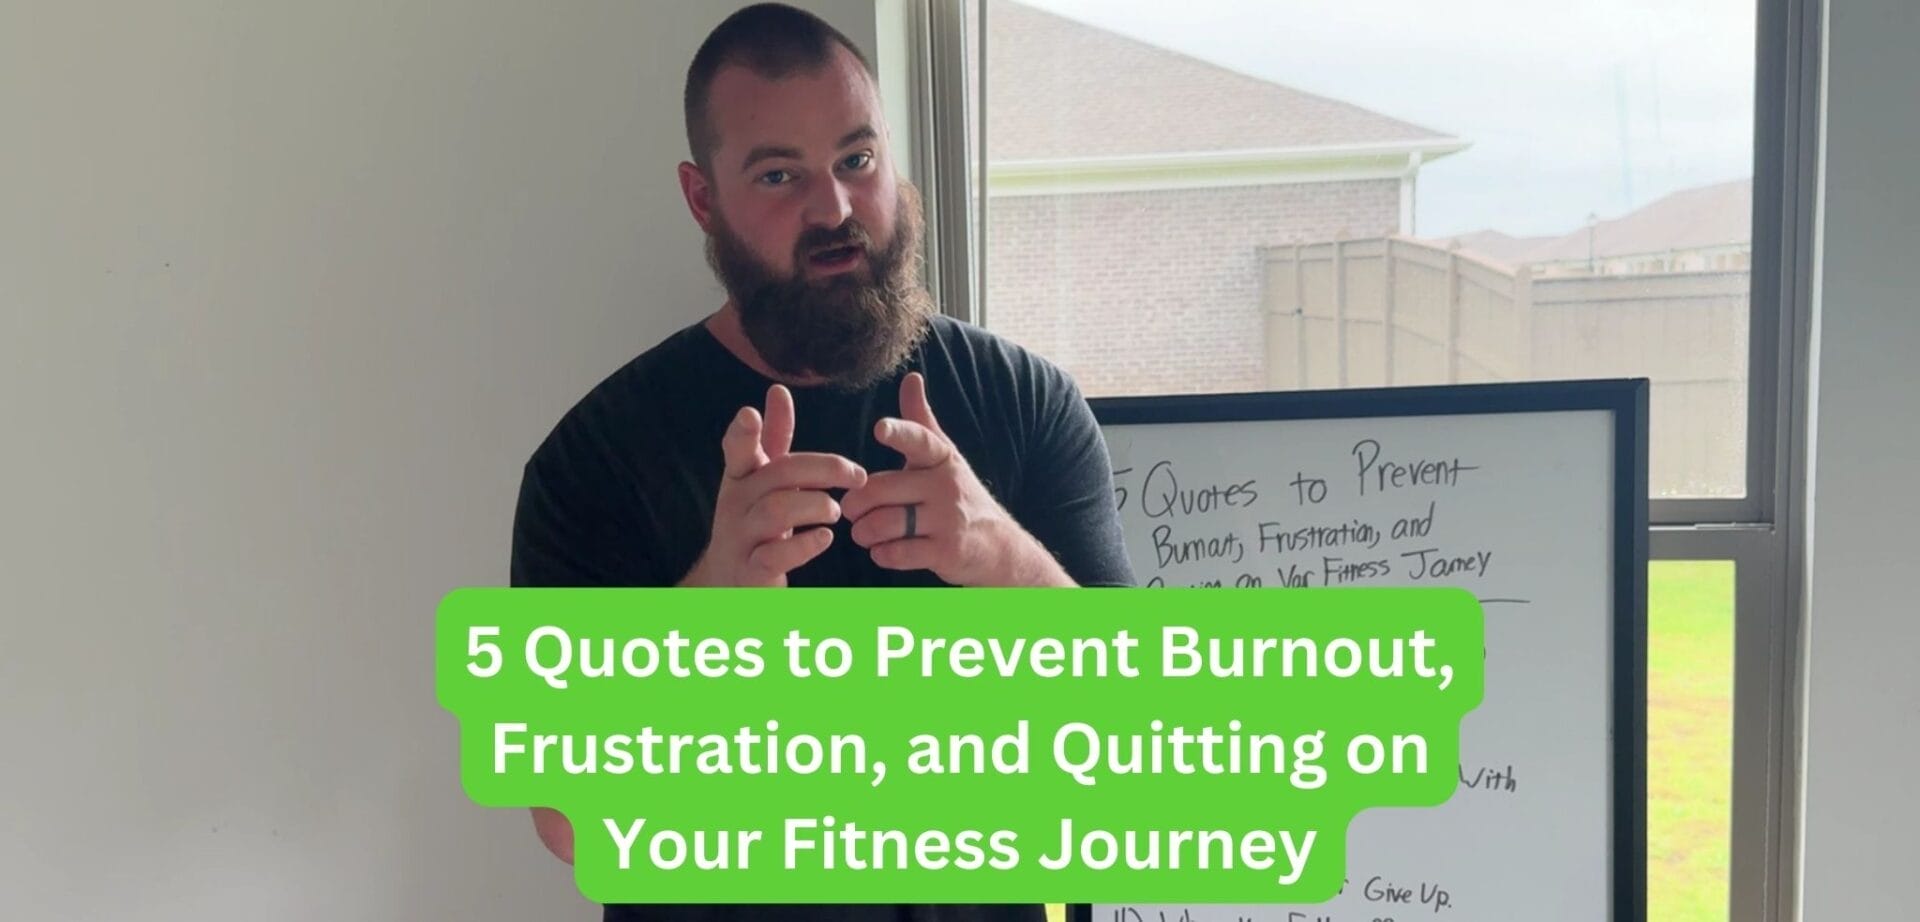 5 Quotes to Prevent Burnout Frustration and Quitting on Your Fitness Journey